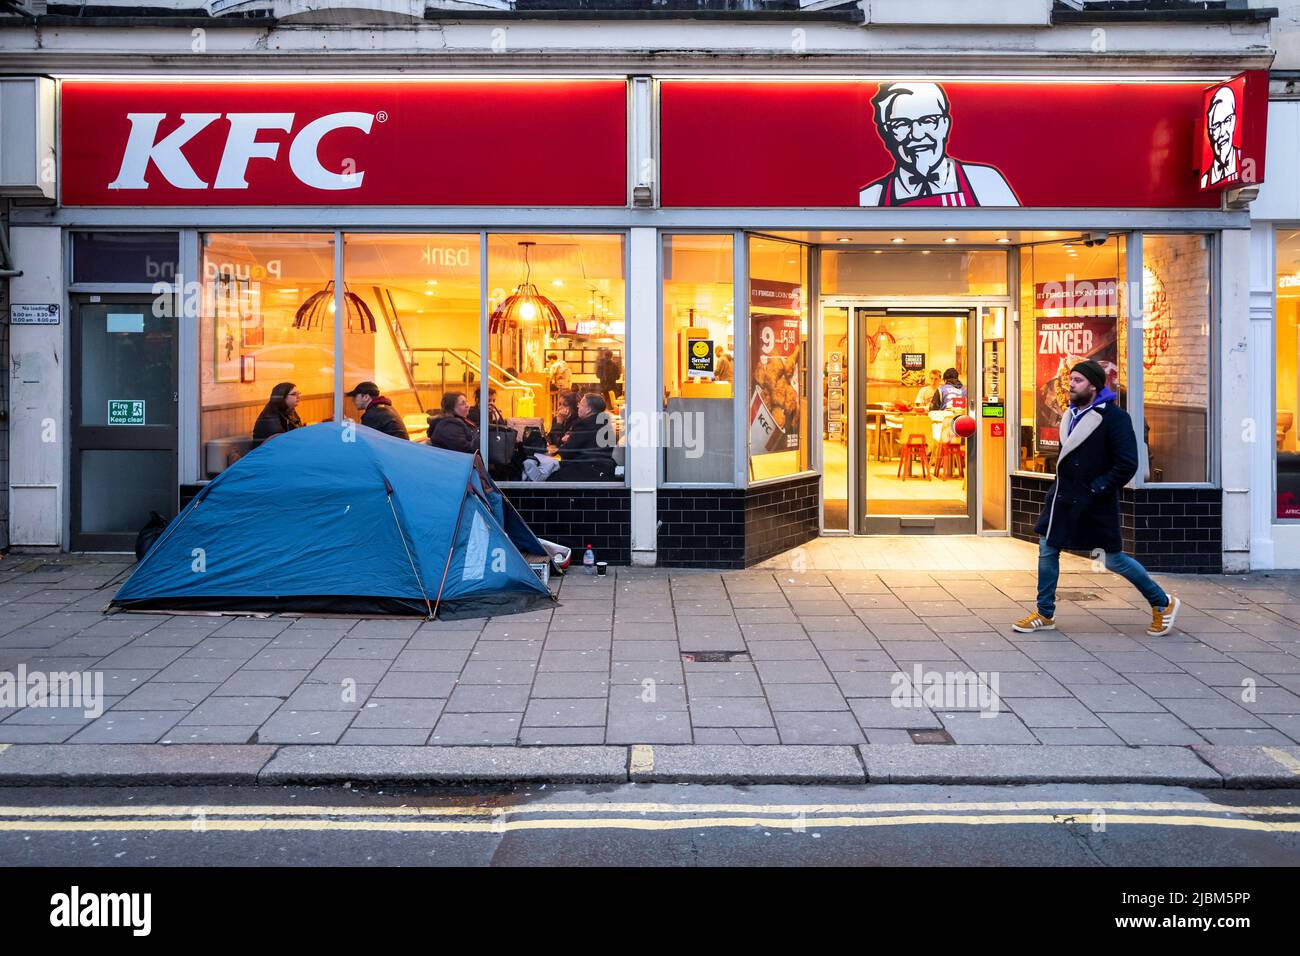 Brighton, March 6th 2019: The homelessness crisis has forced one person to pitch a tent outside KFC on the main shopping street, Western Road Stock Photo